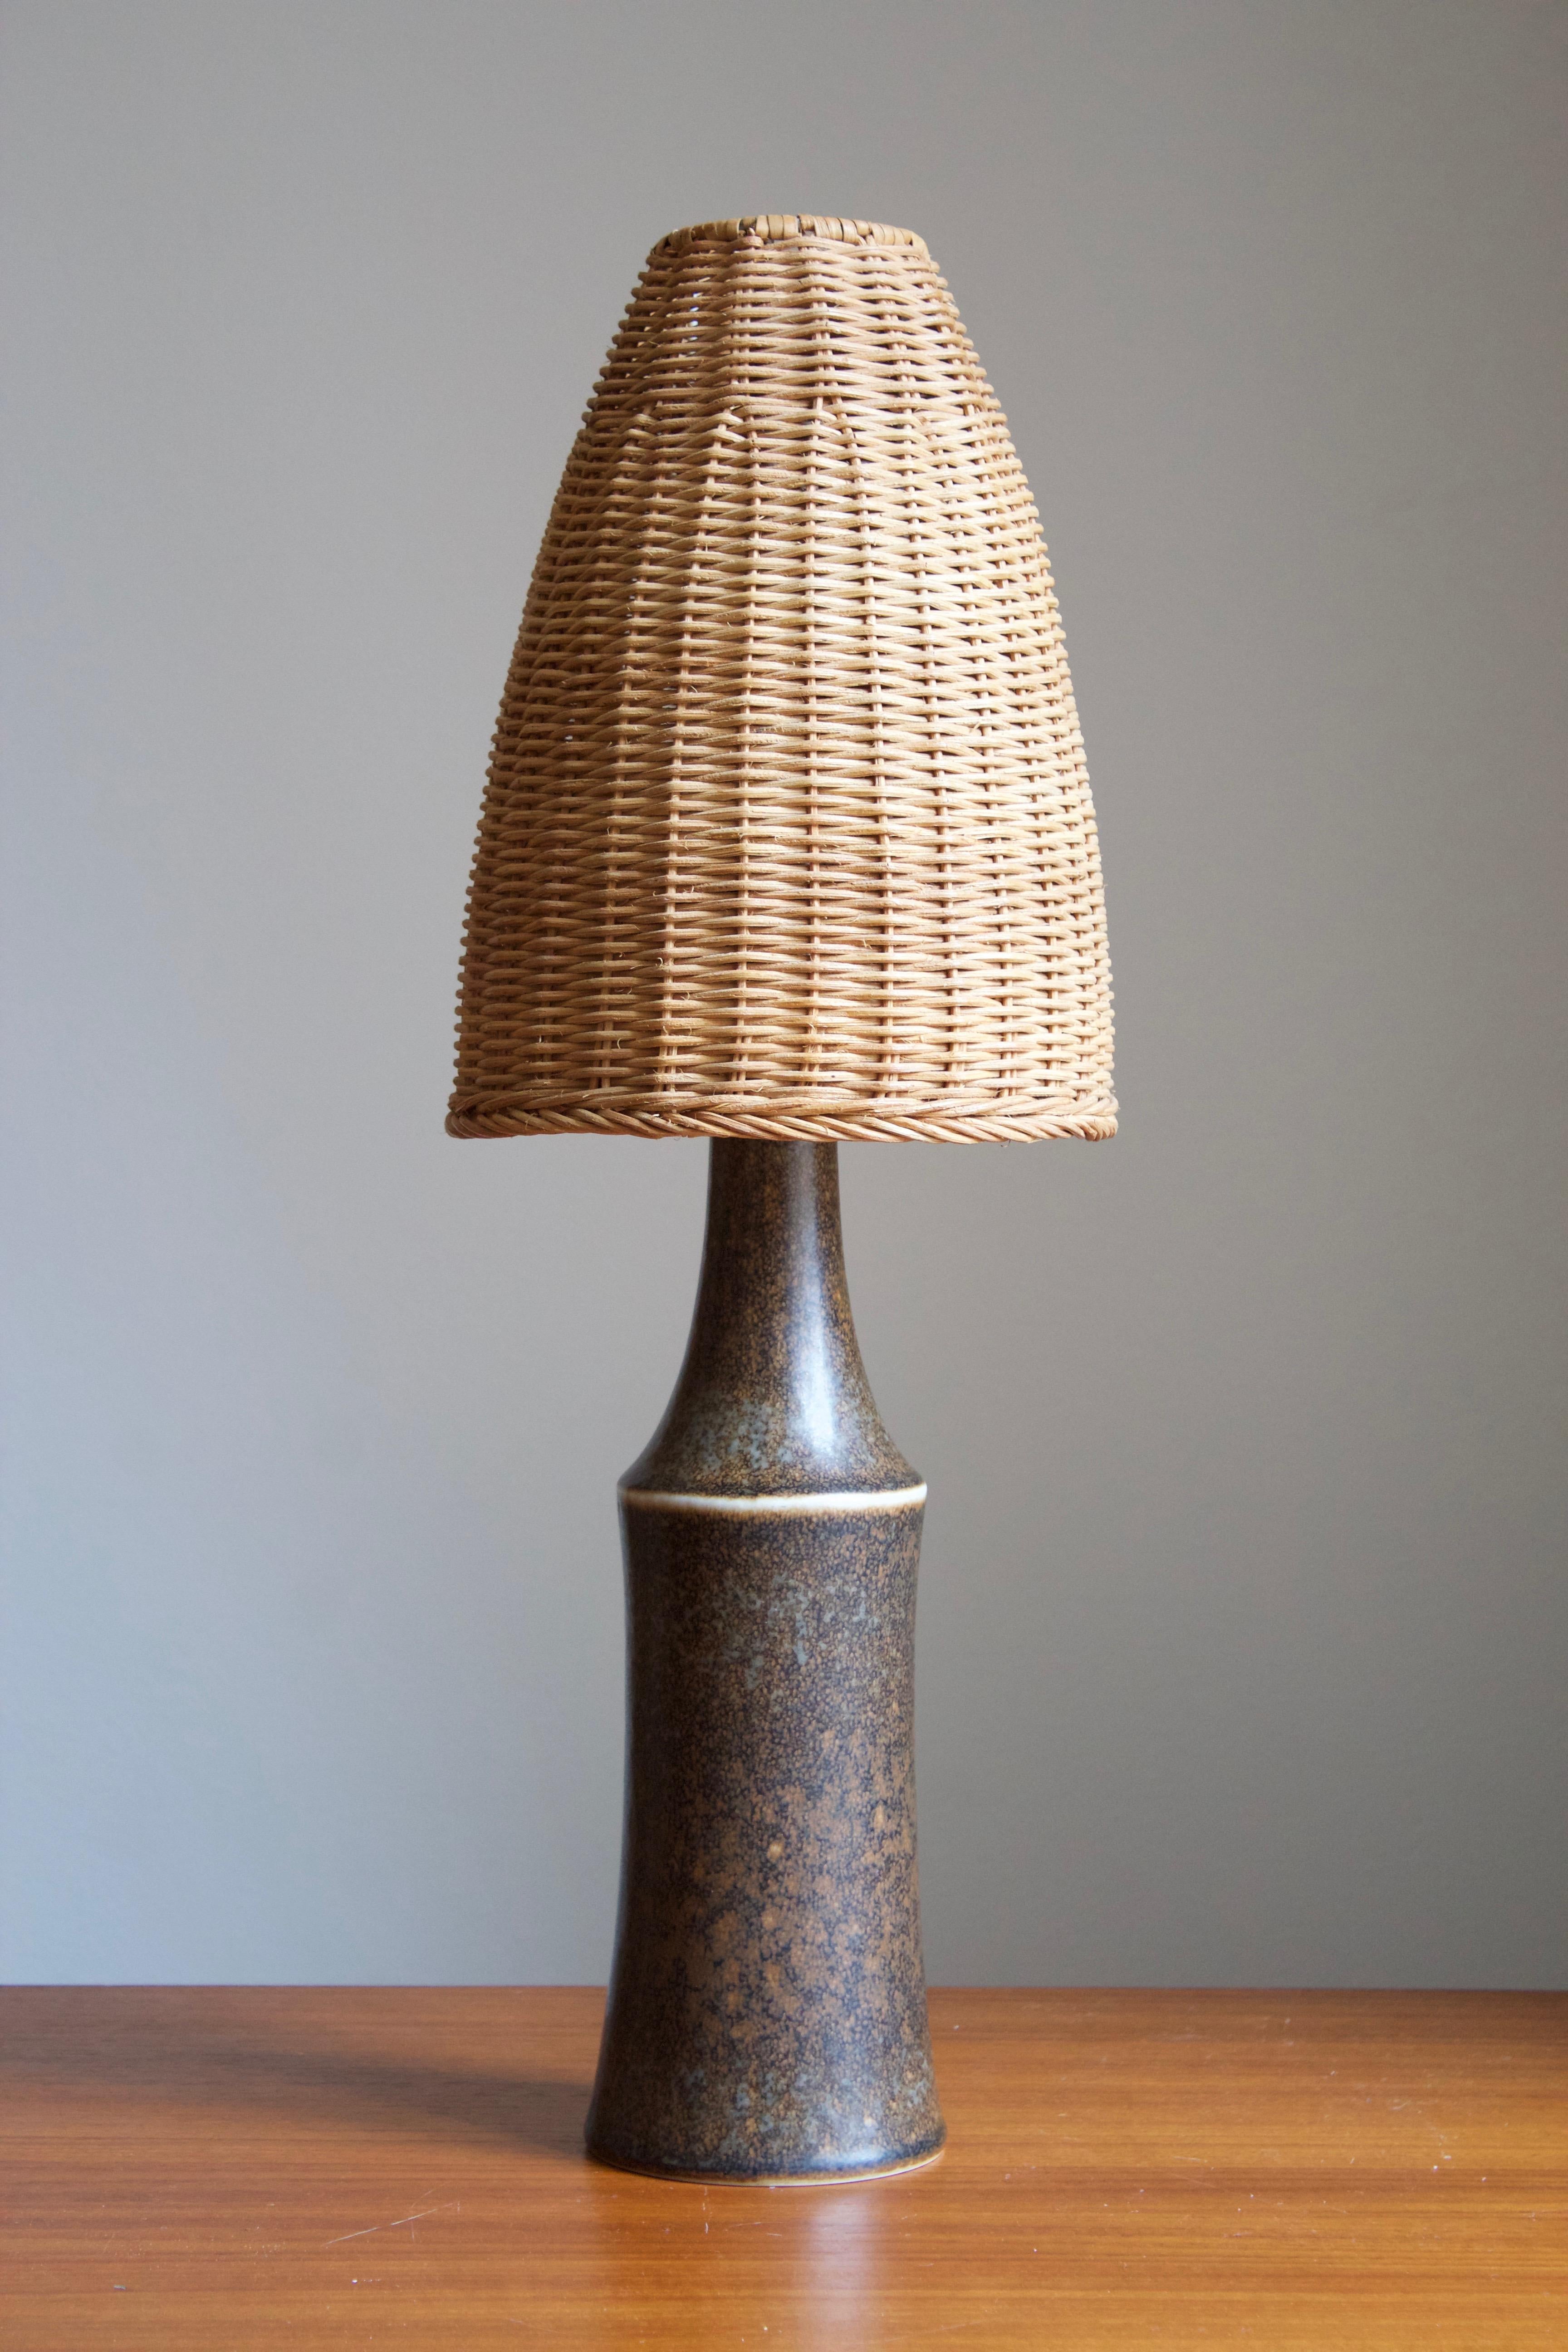 A table lamp by Carl-Harry Stålhane for the iconic Swedish firm Rörstrand. 

Stated dimensions exclude lampshades. Height includes socket. Lampshade illustrated can be included in purchase upon request. 

Other ceramicists of the period include